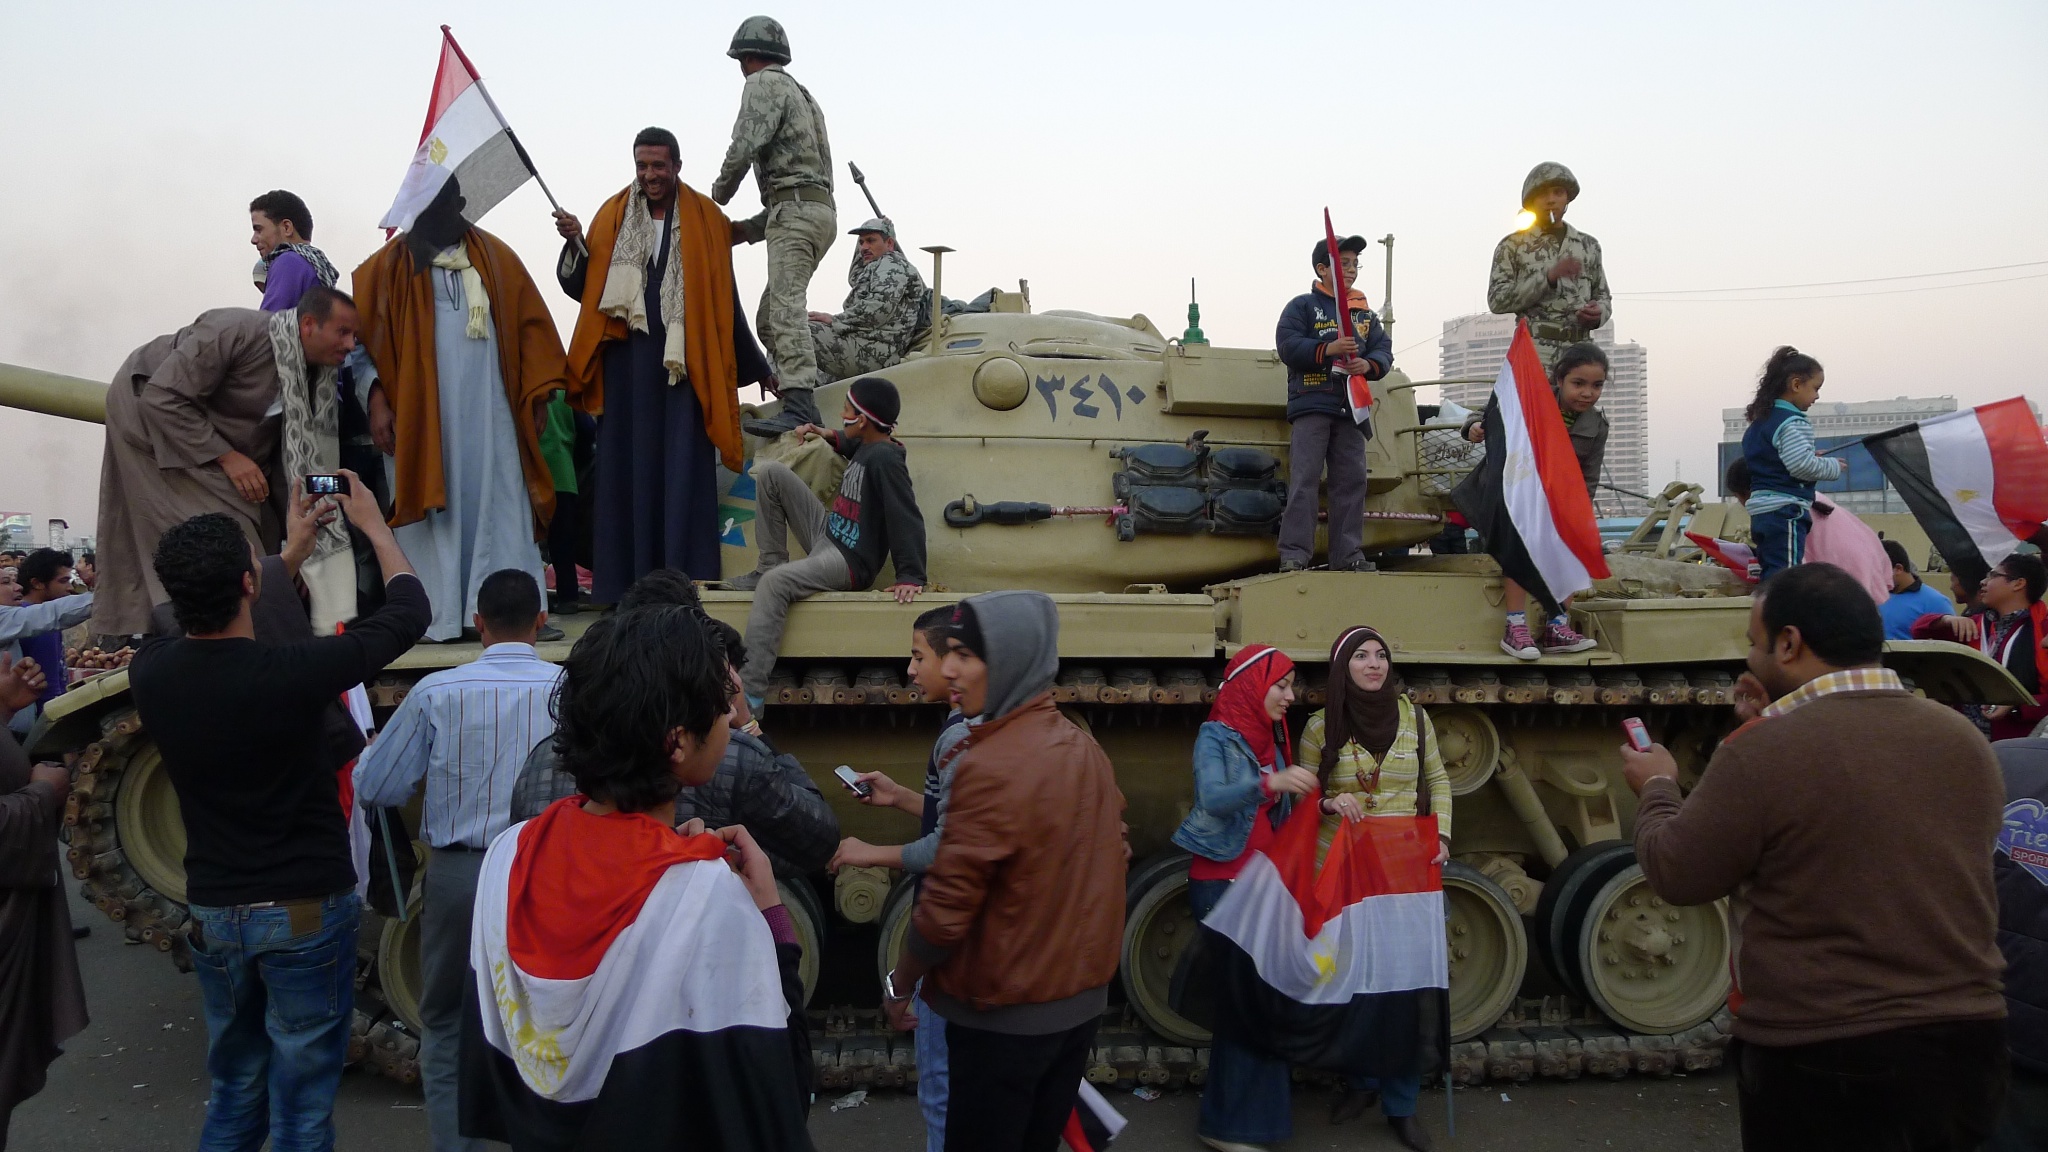 Photograph of protesters standing on a M-60 tank taken by Stefan Geens used under a creative commons license.